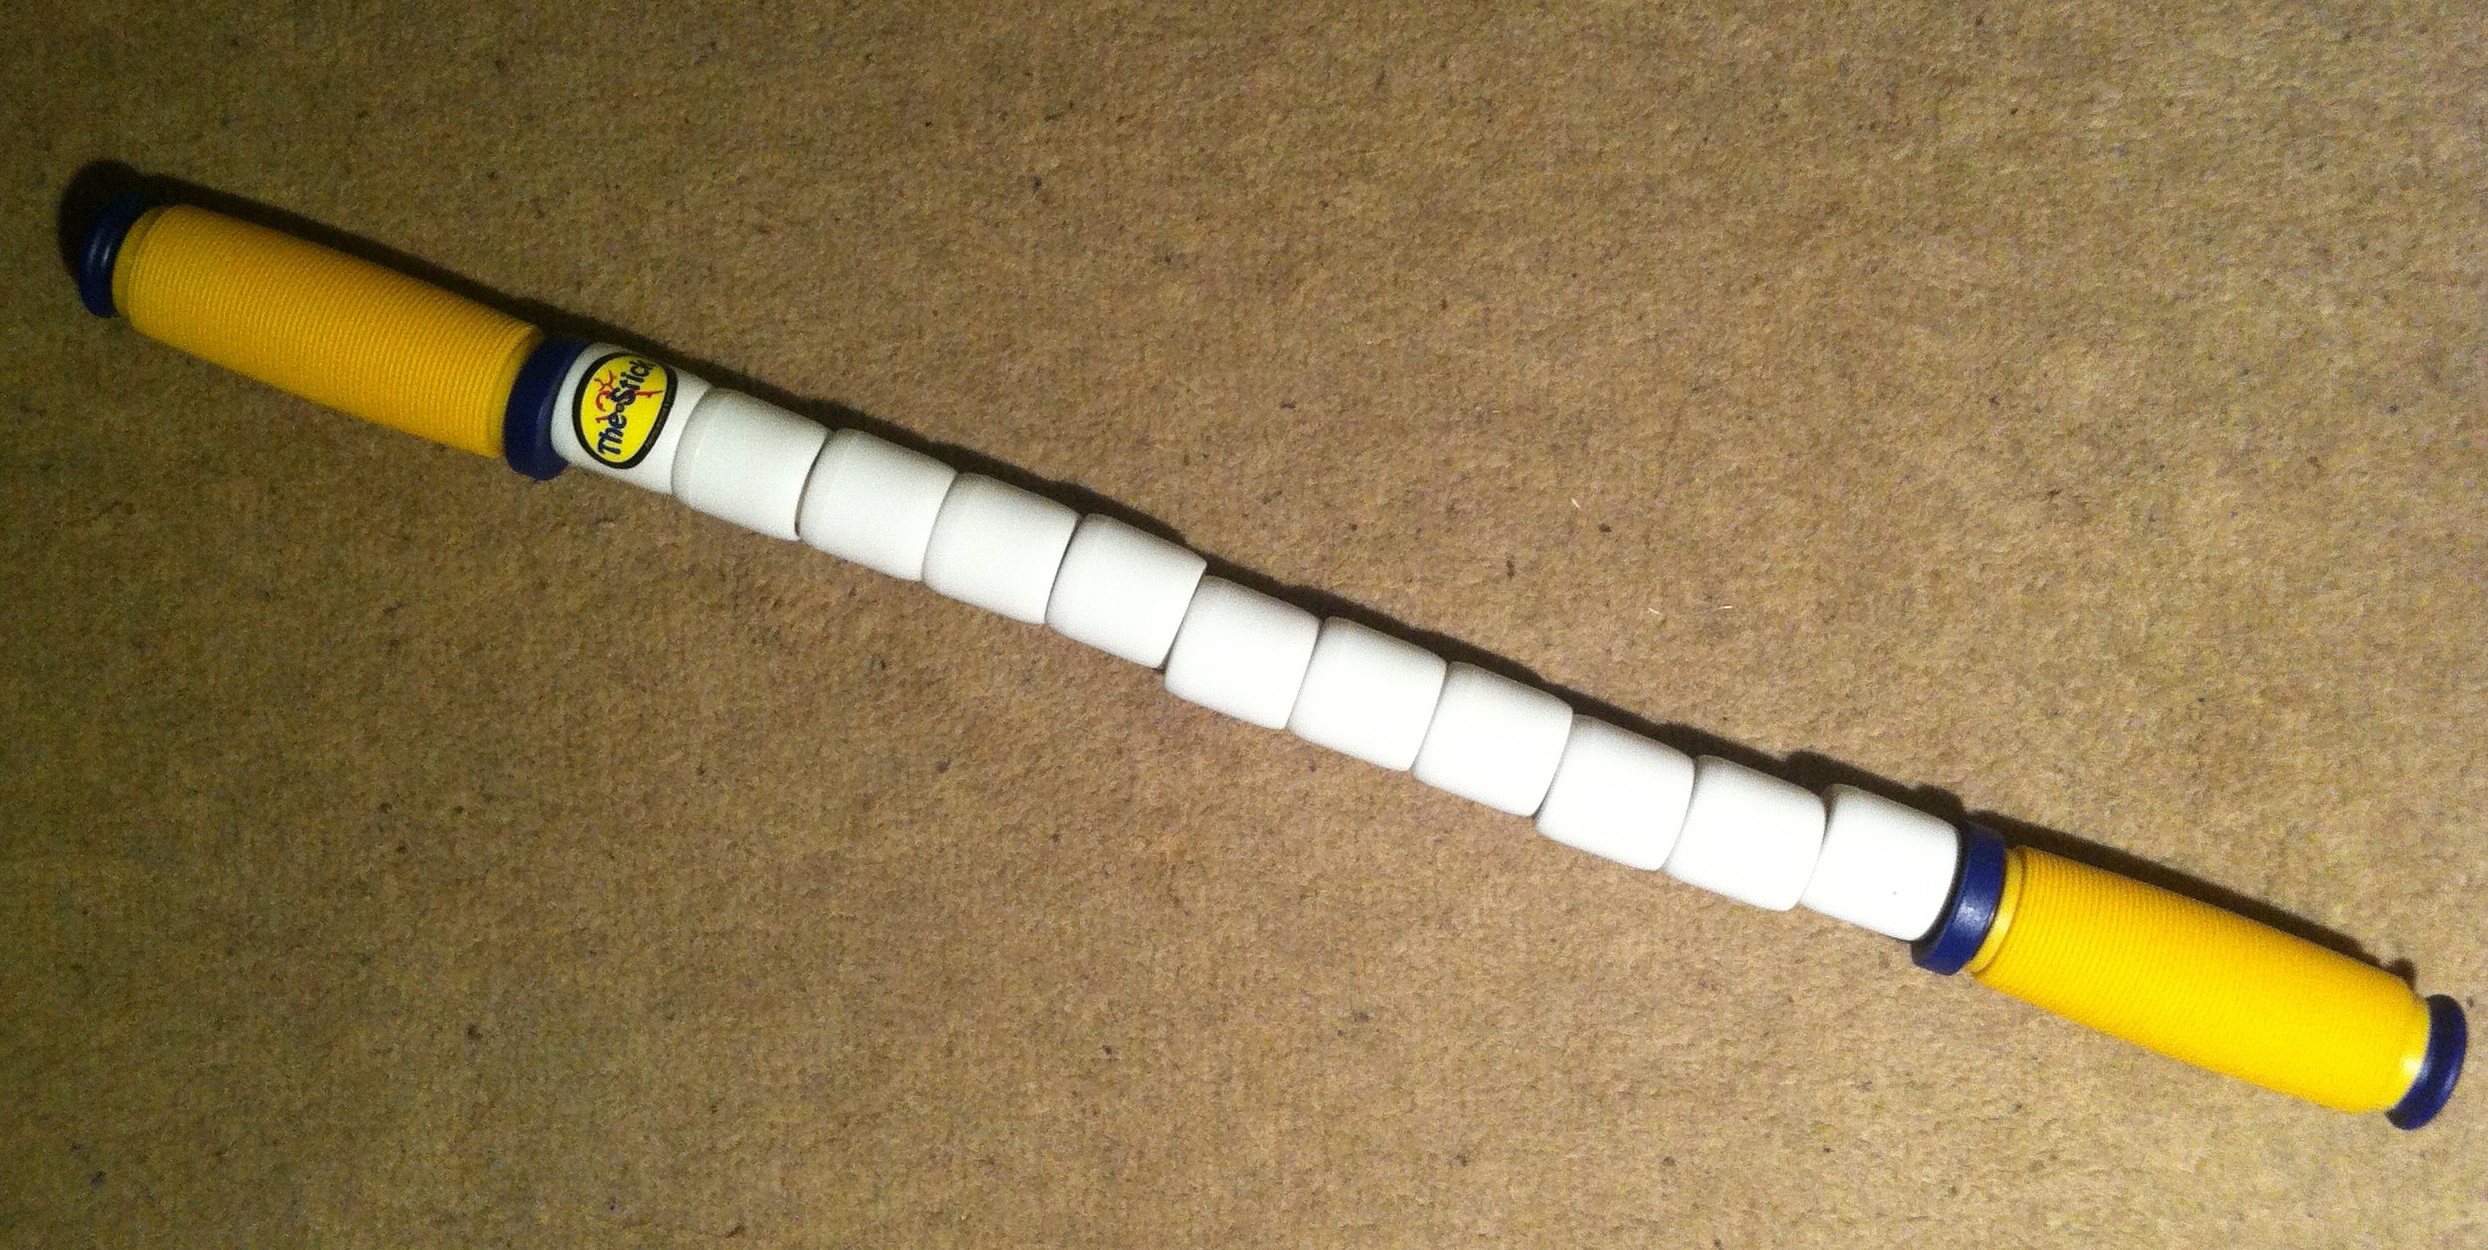 Review: 'The Stick' Myofascial Muscle Release Roller